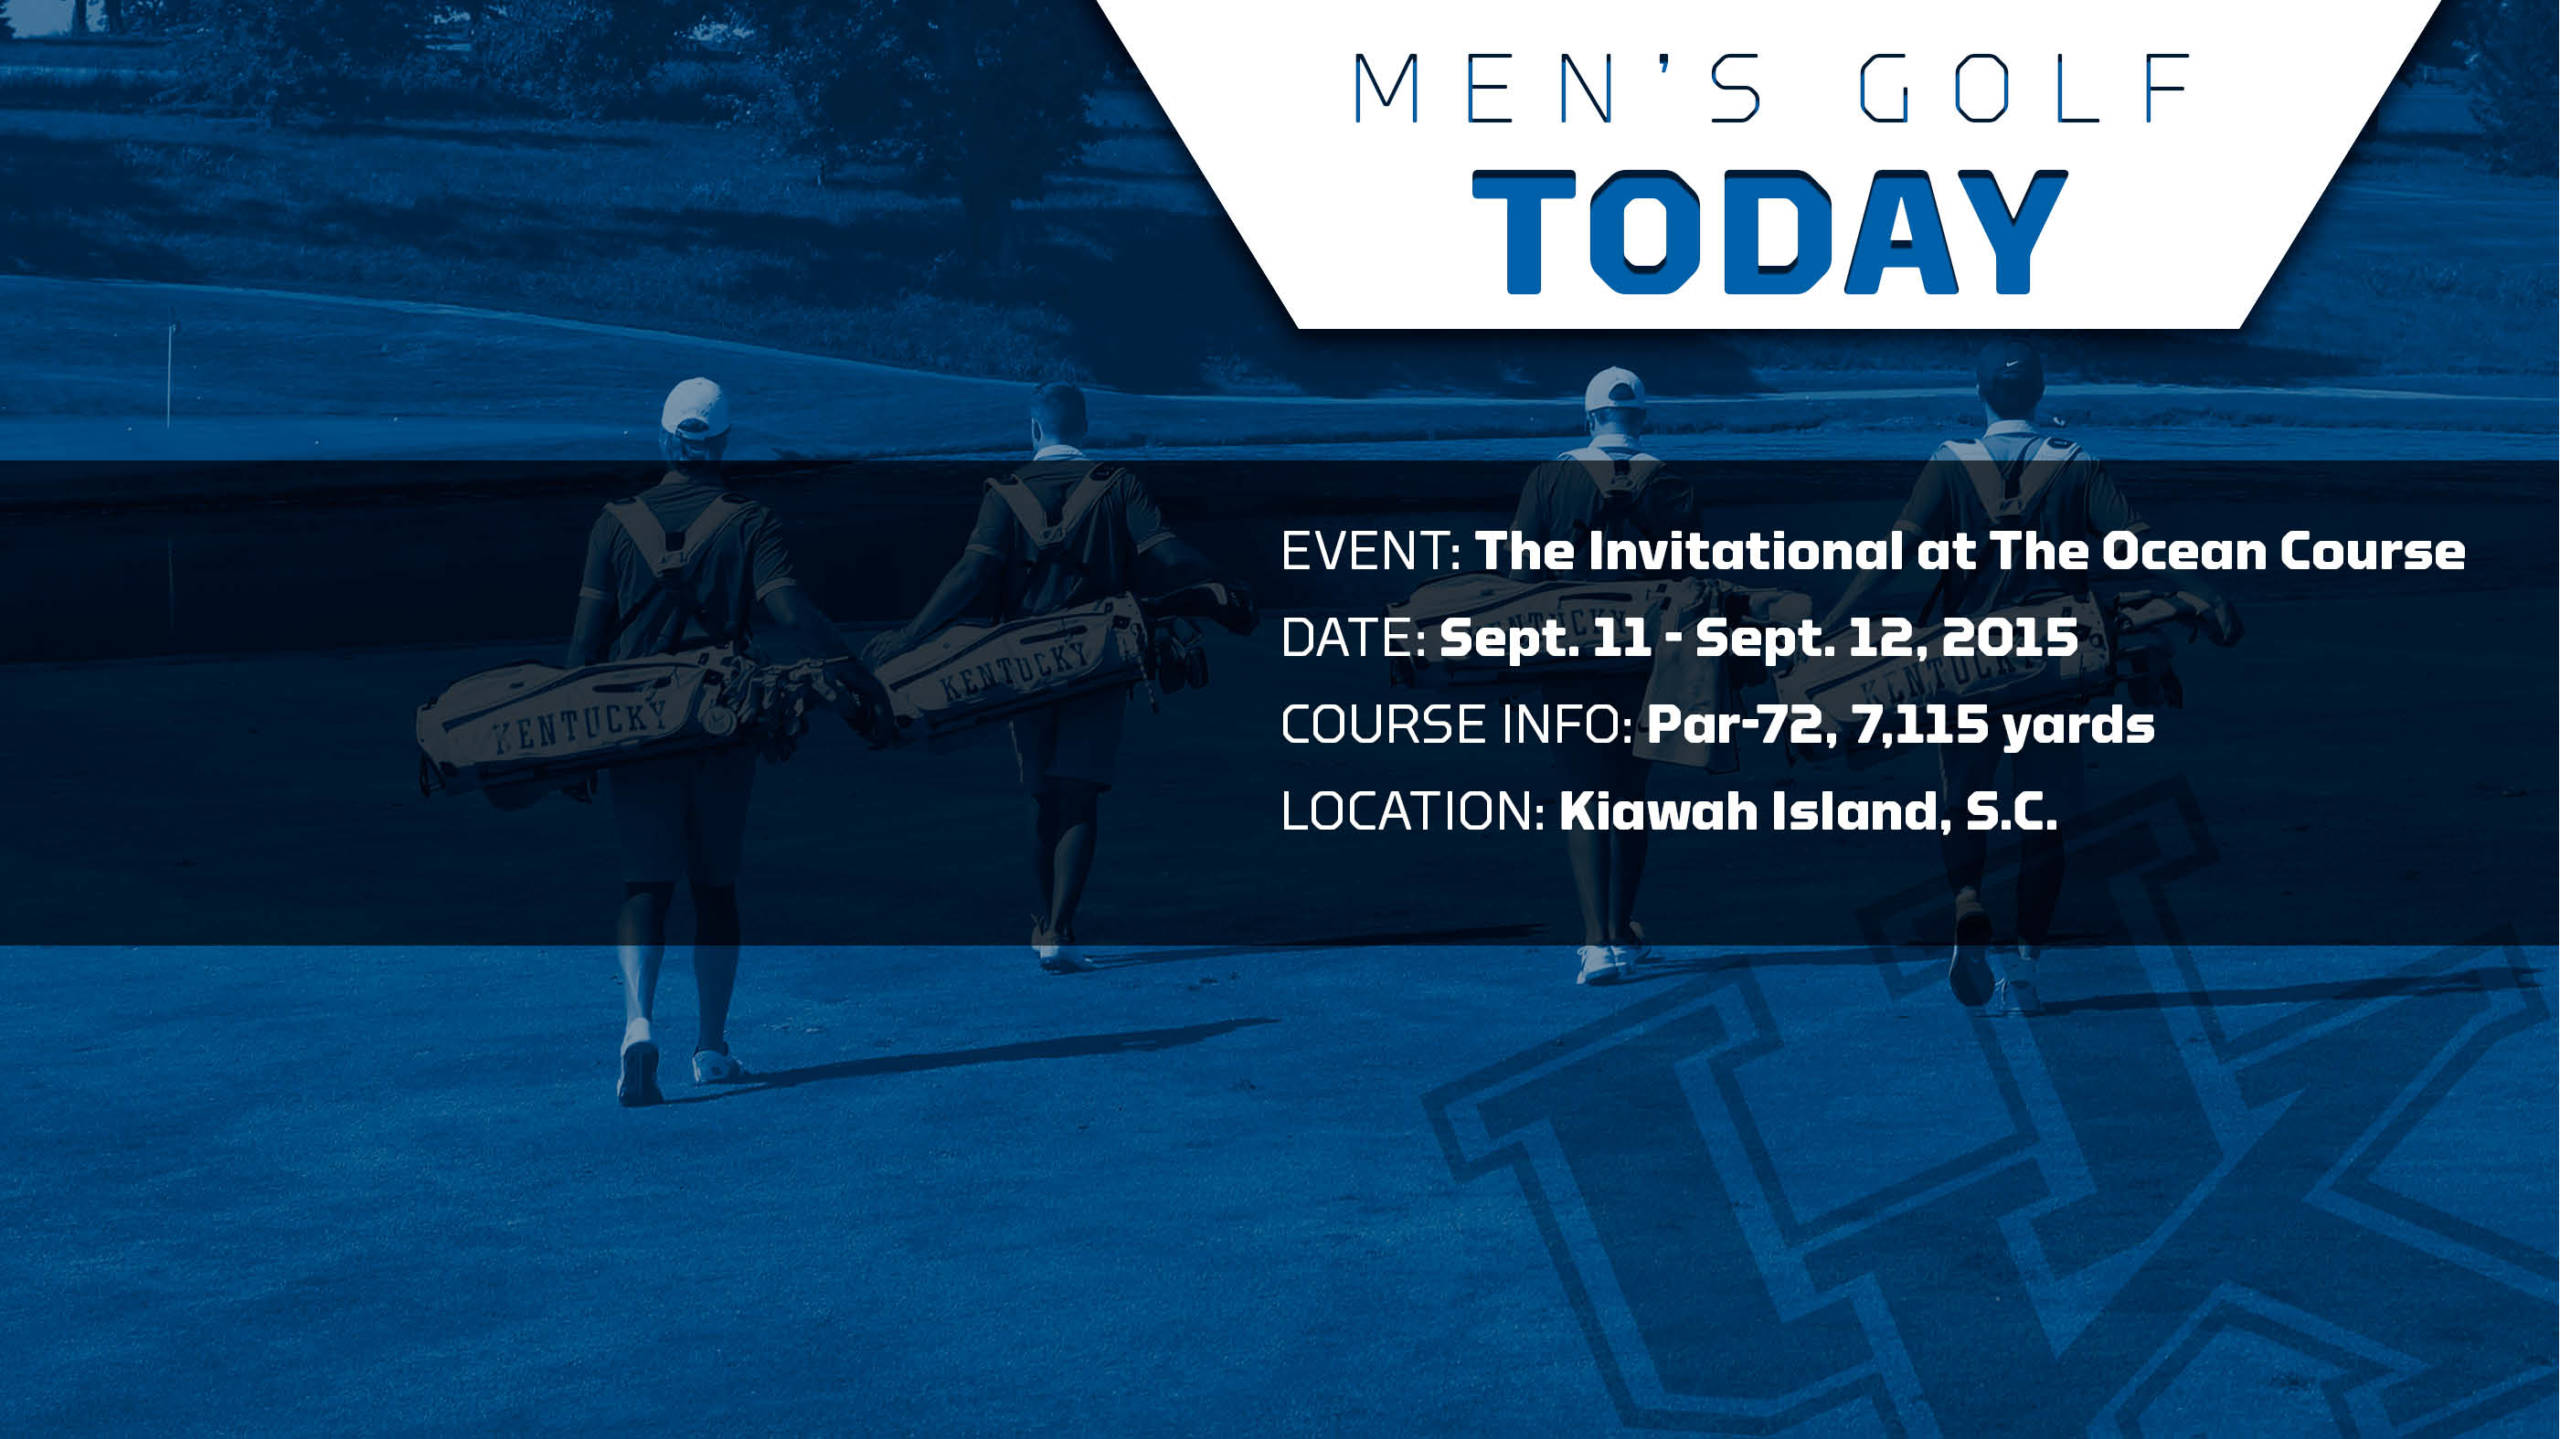 Kentucky Begins 2015-16 at The Invitational at the Ocean Course